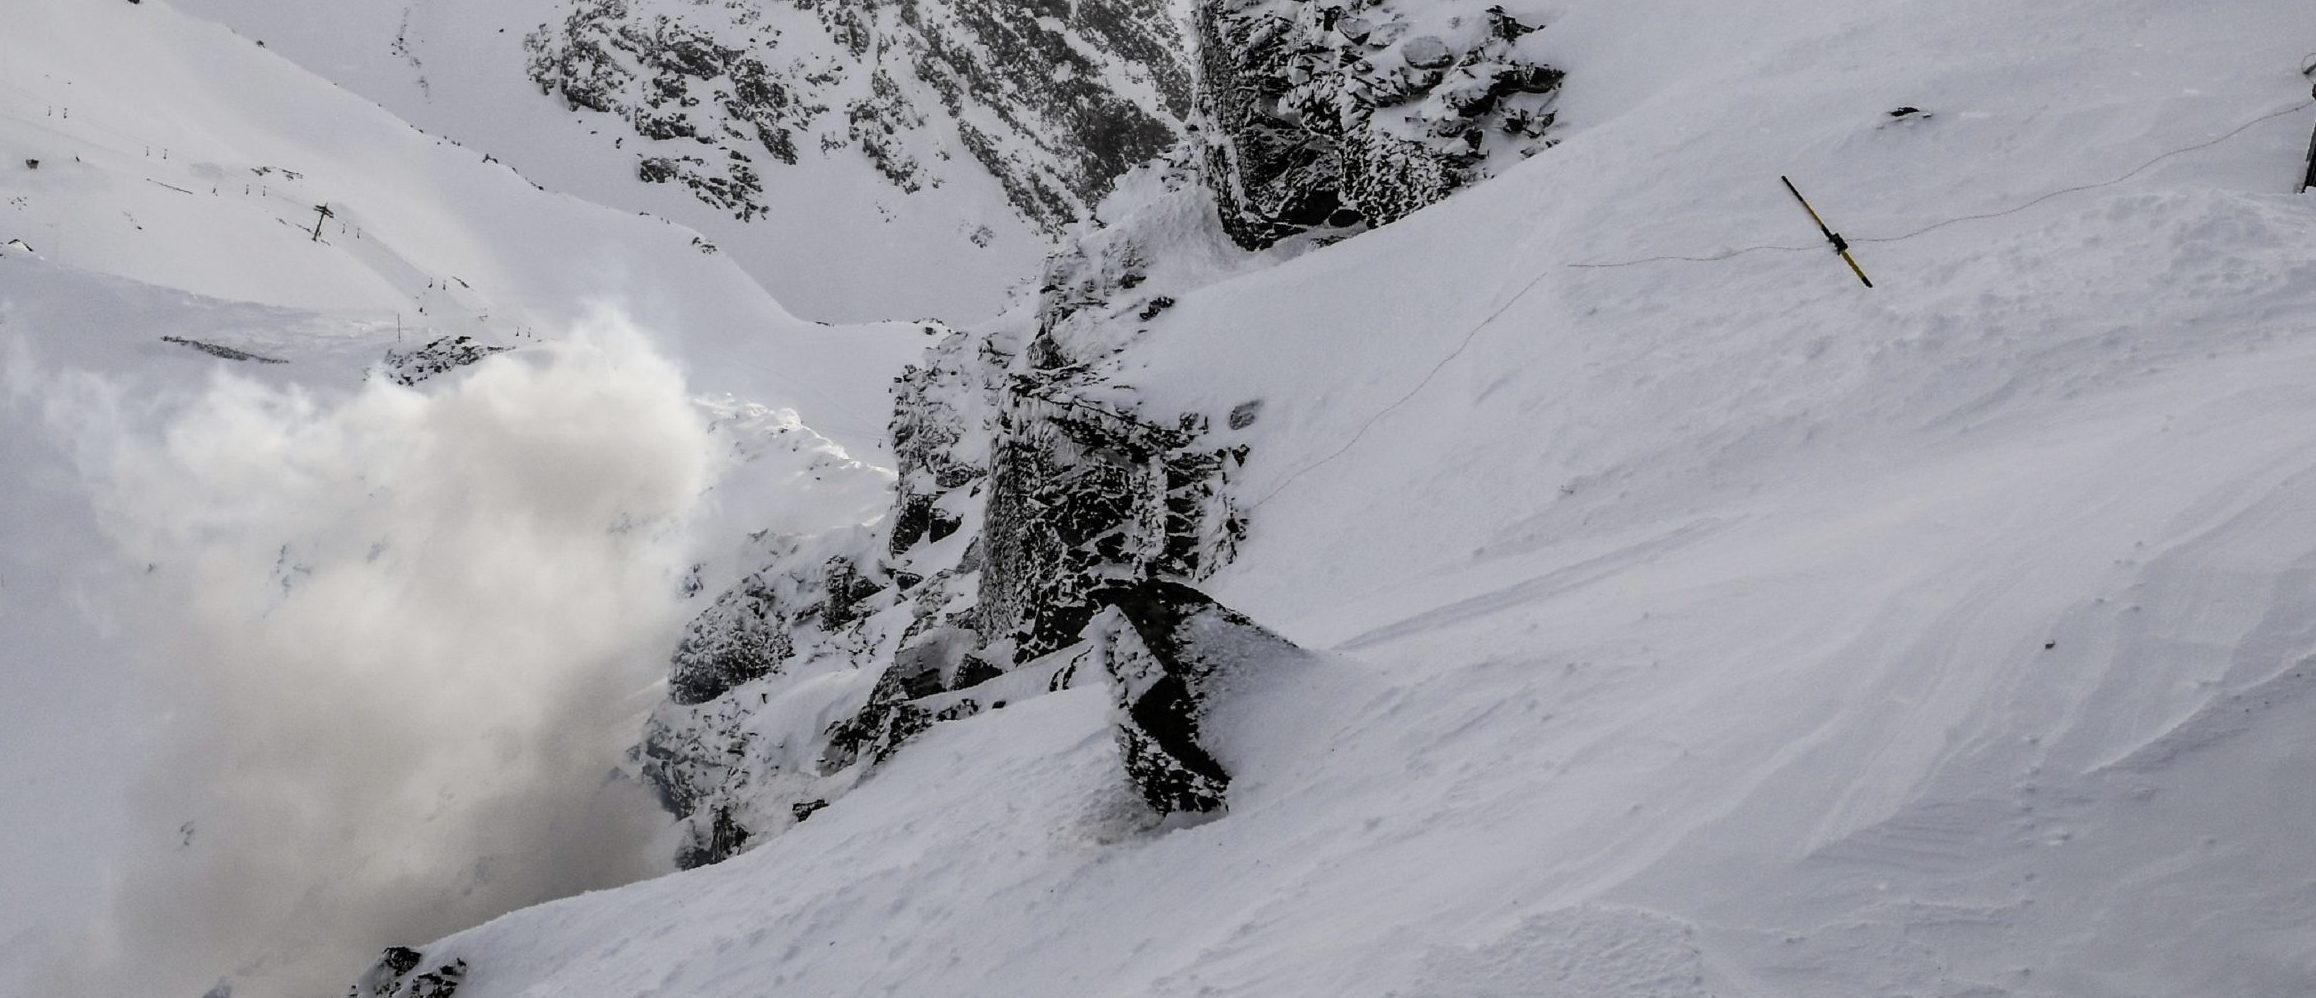 Avalanche Kills 2 Snowshoers, Dog In Colorado The Daily Caller